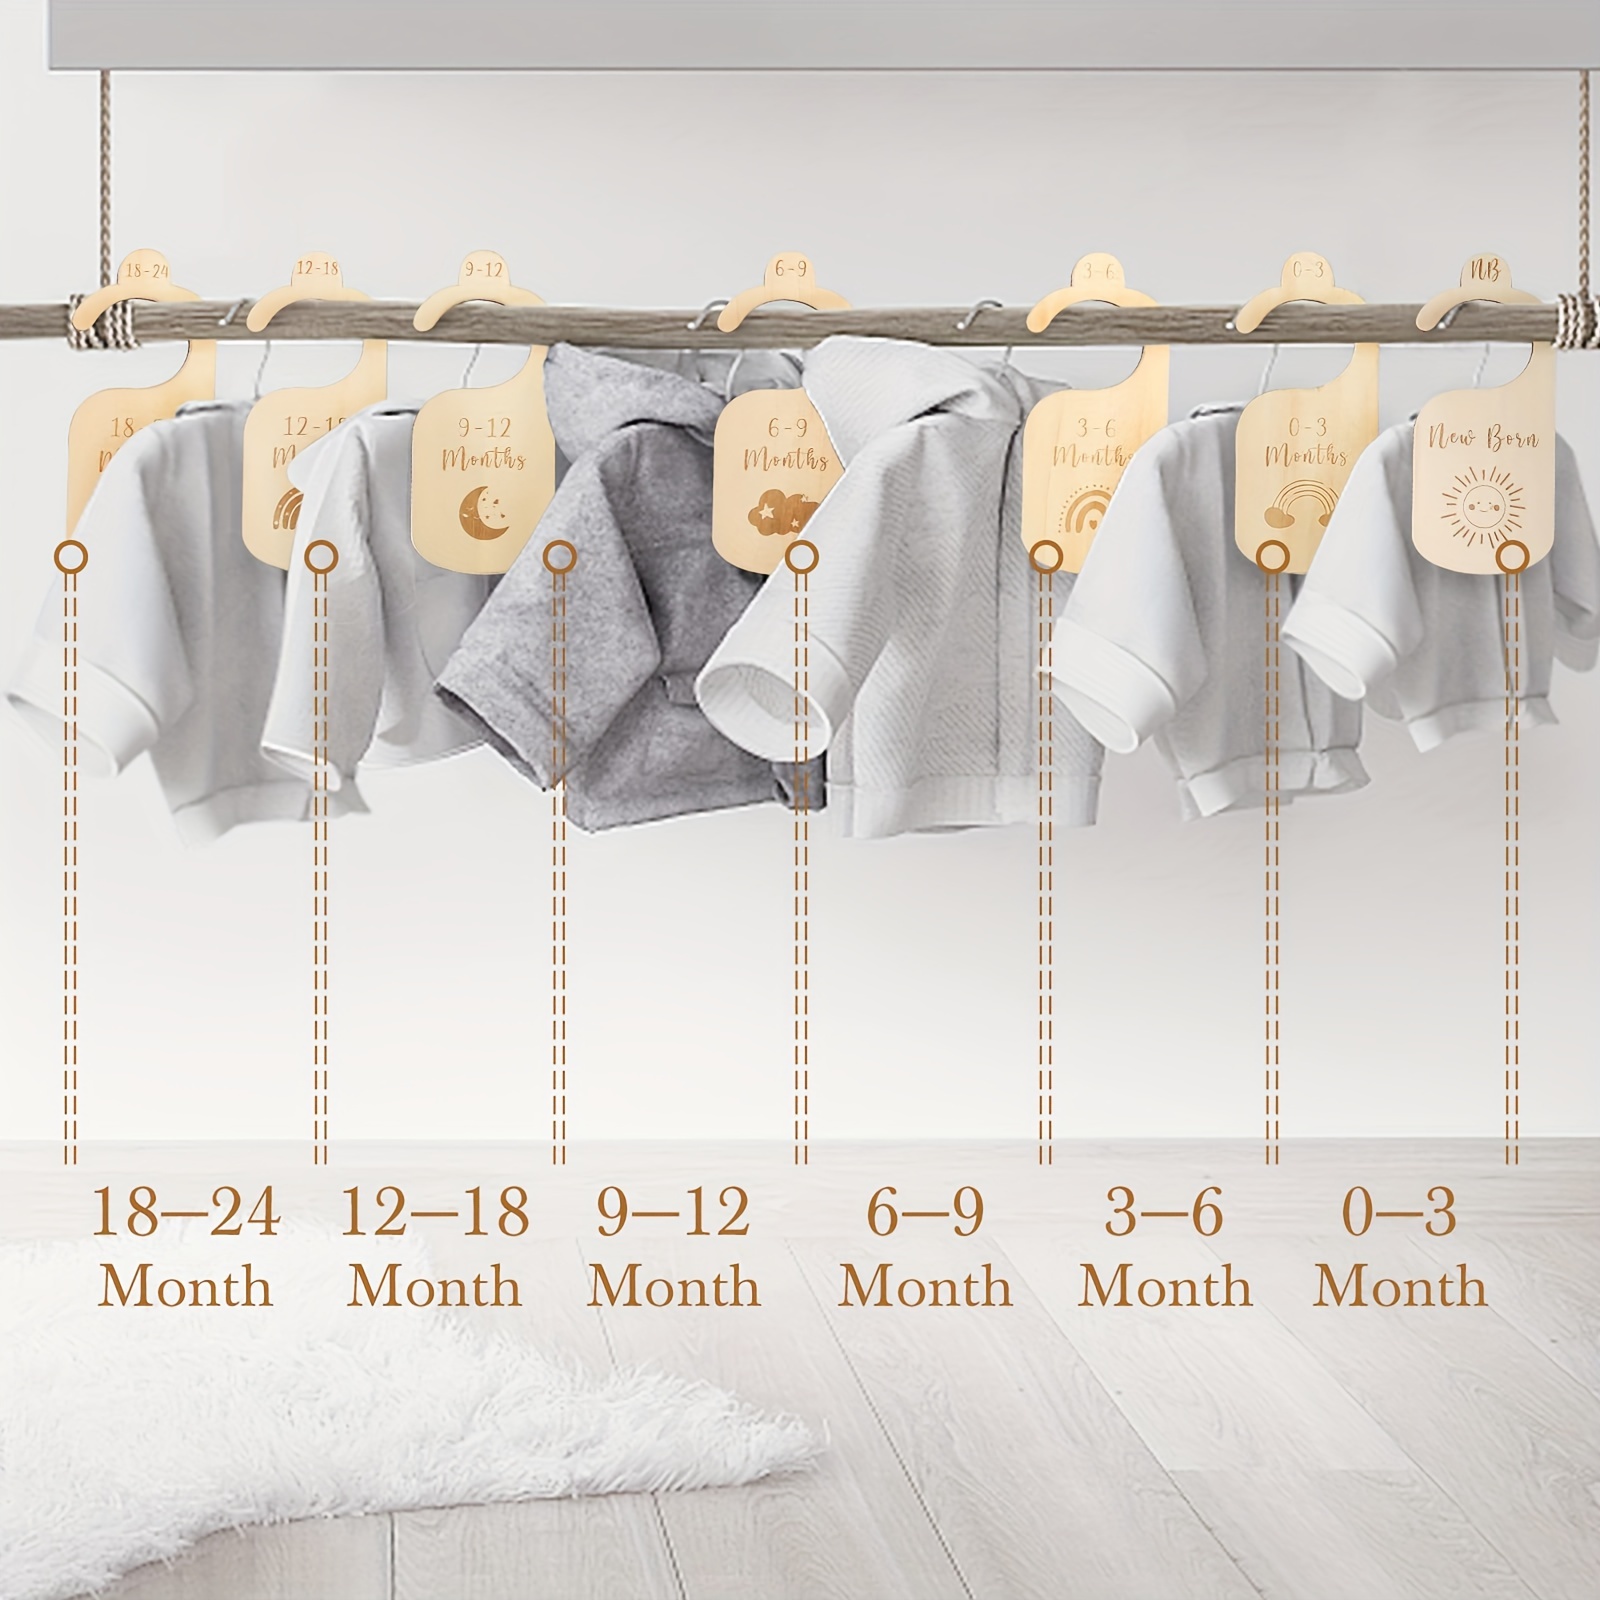 Baby Closet Dividers for Clothes Organizer - Set of 7 Adorable Wooden  Double-Sided Baby Clothes Size Hanger Organizer from Newborn to 24 Months  for